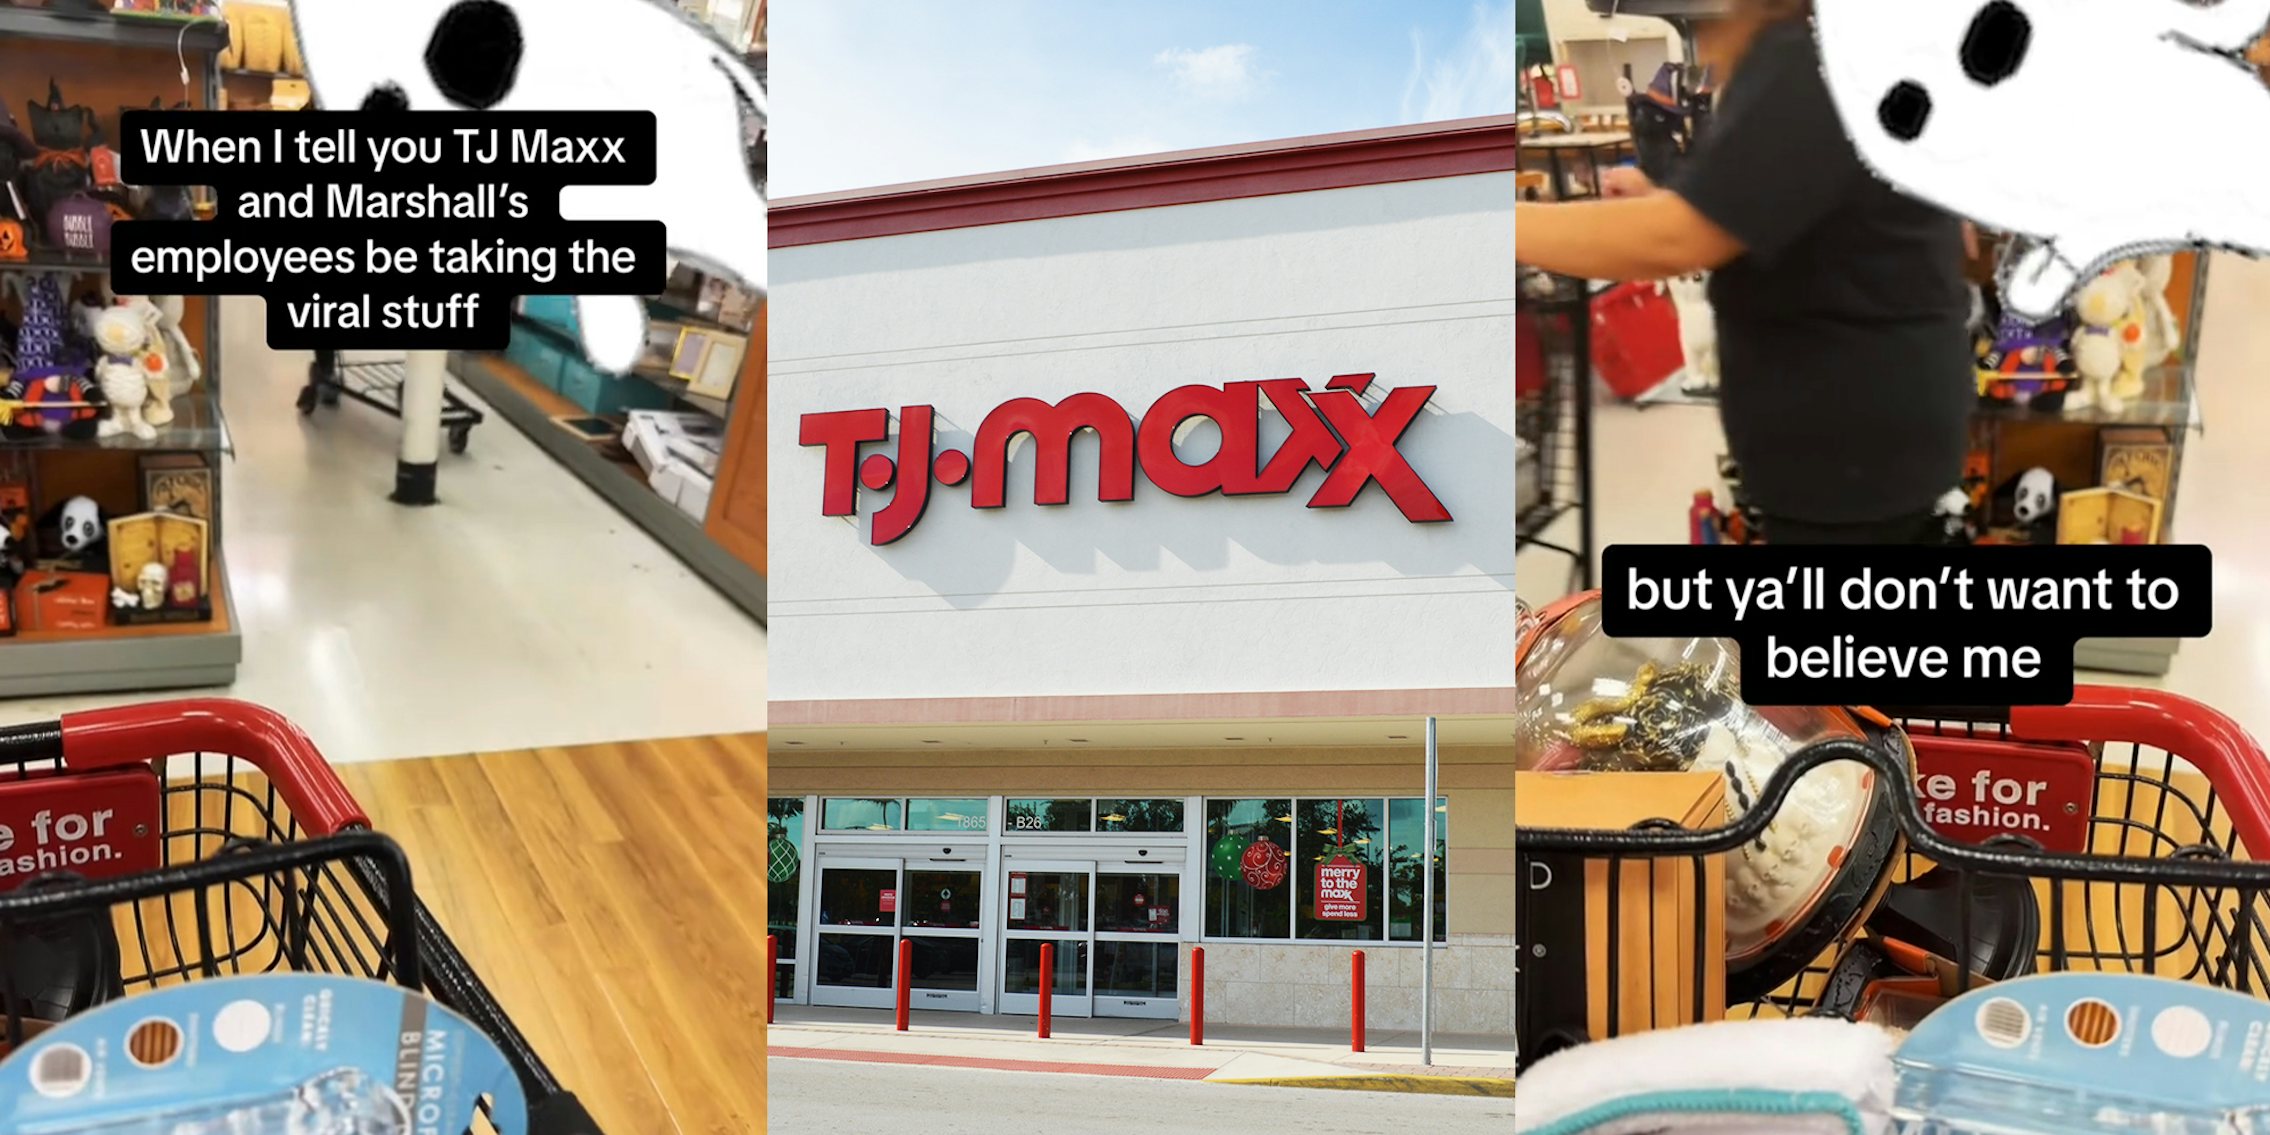 customer catches tj maxx worker ‘taking the viral stuff’ for herself